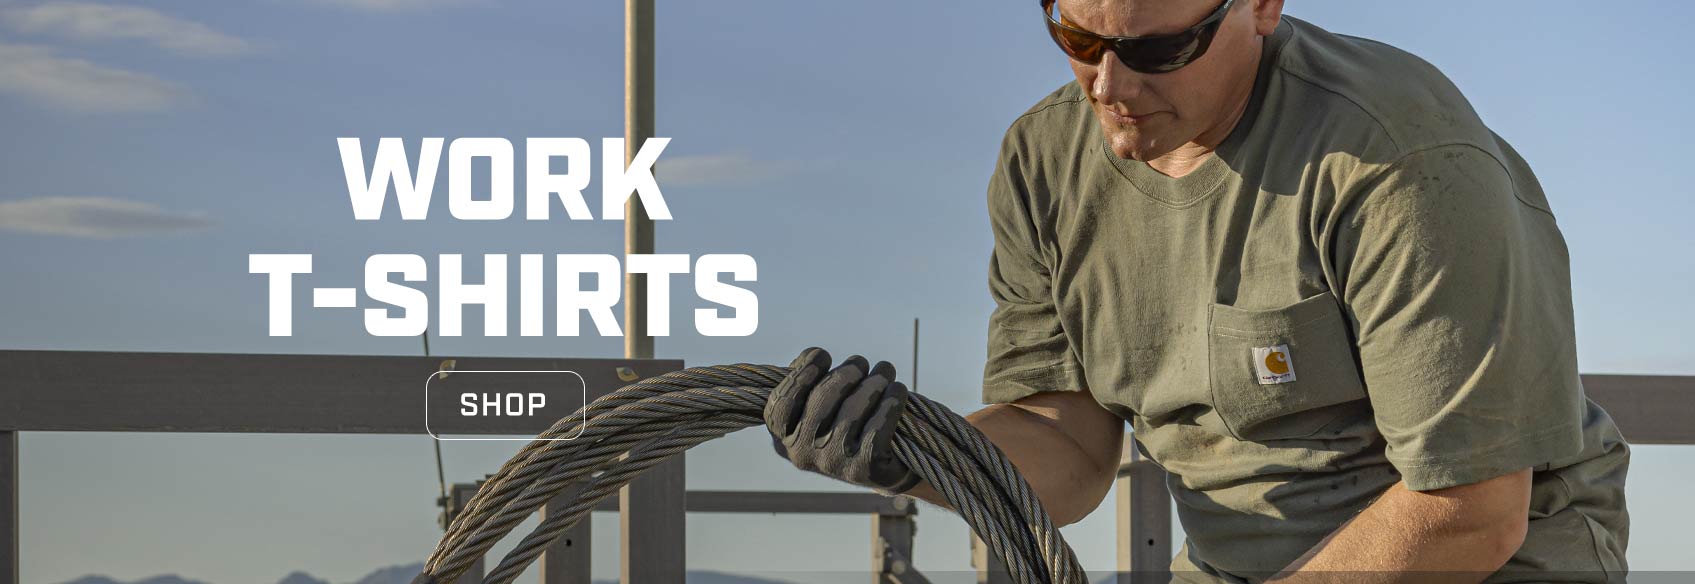 A man working outside wearing a Carhartt t-shirt and winding up steel cable.